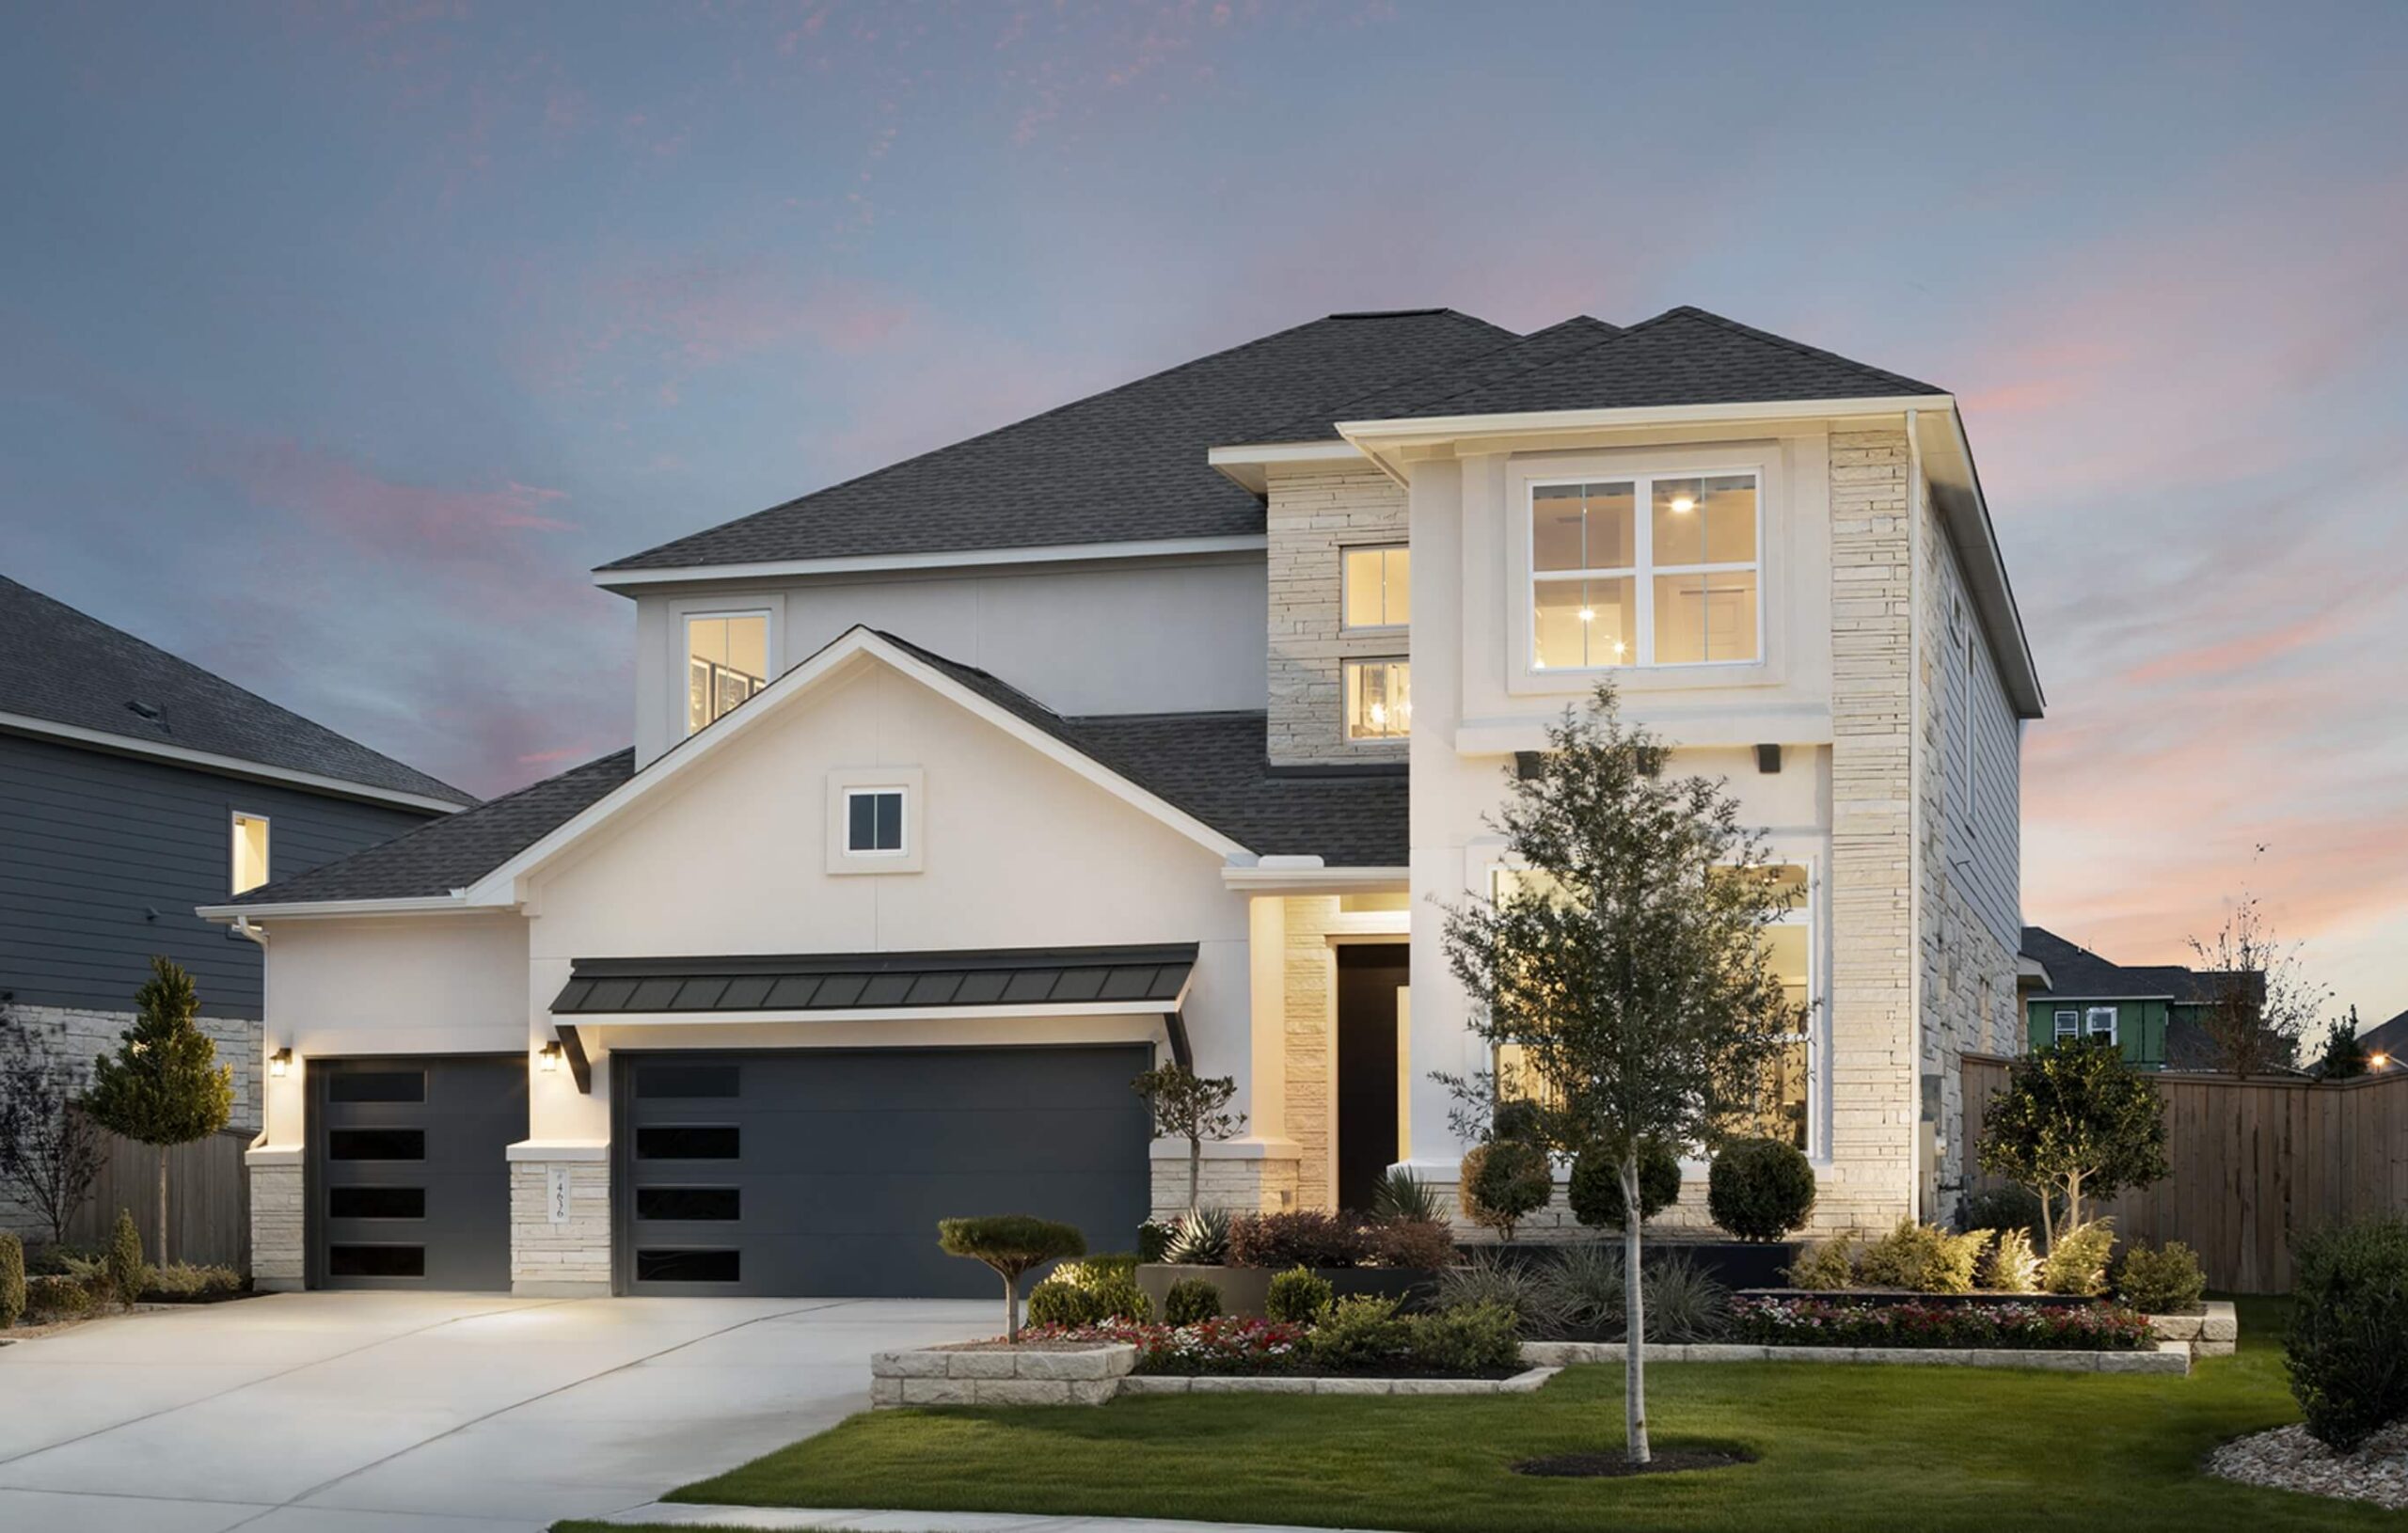 A new home with a garage and driveway in New Braunfels, Texas at dusk.